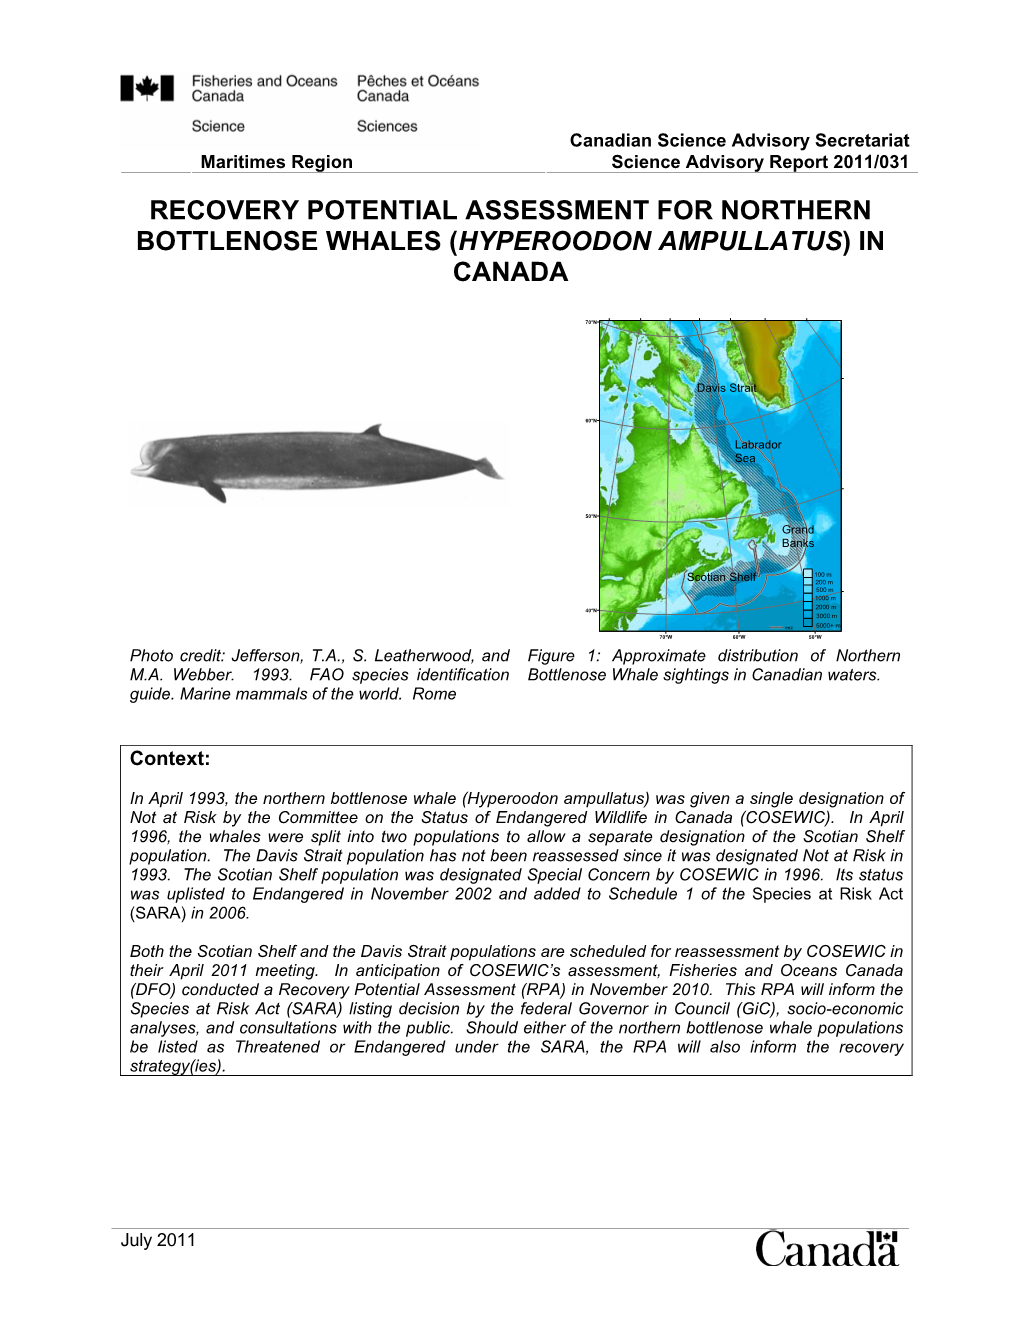 Recovery Potential Assessment for Northern Bottlenose Whales (Hyperoodon Ampullatus) in Canada